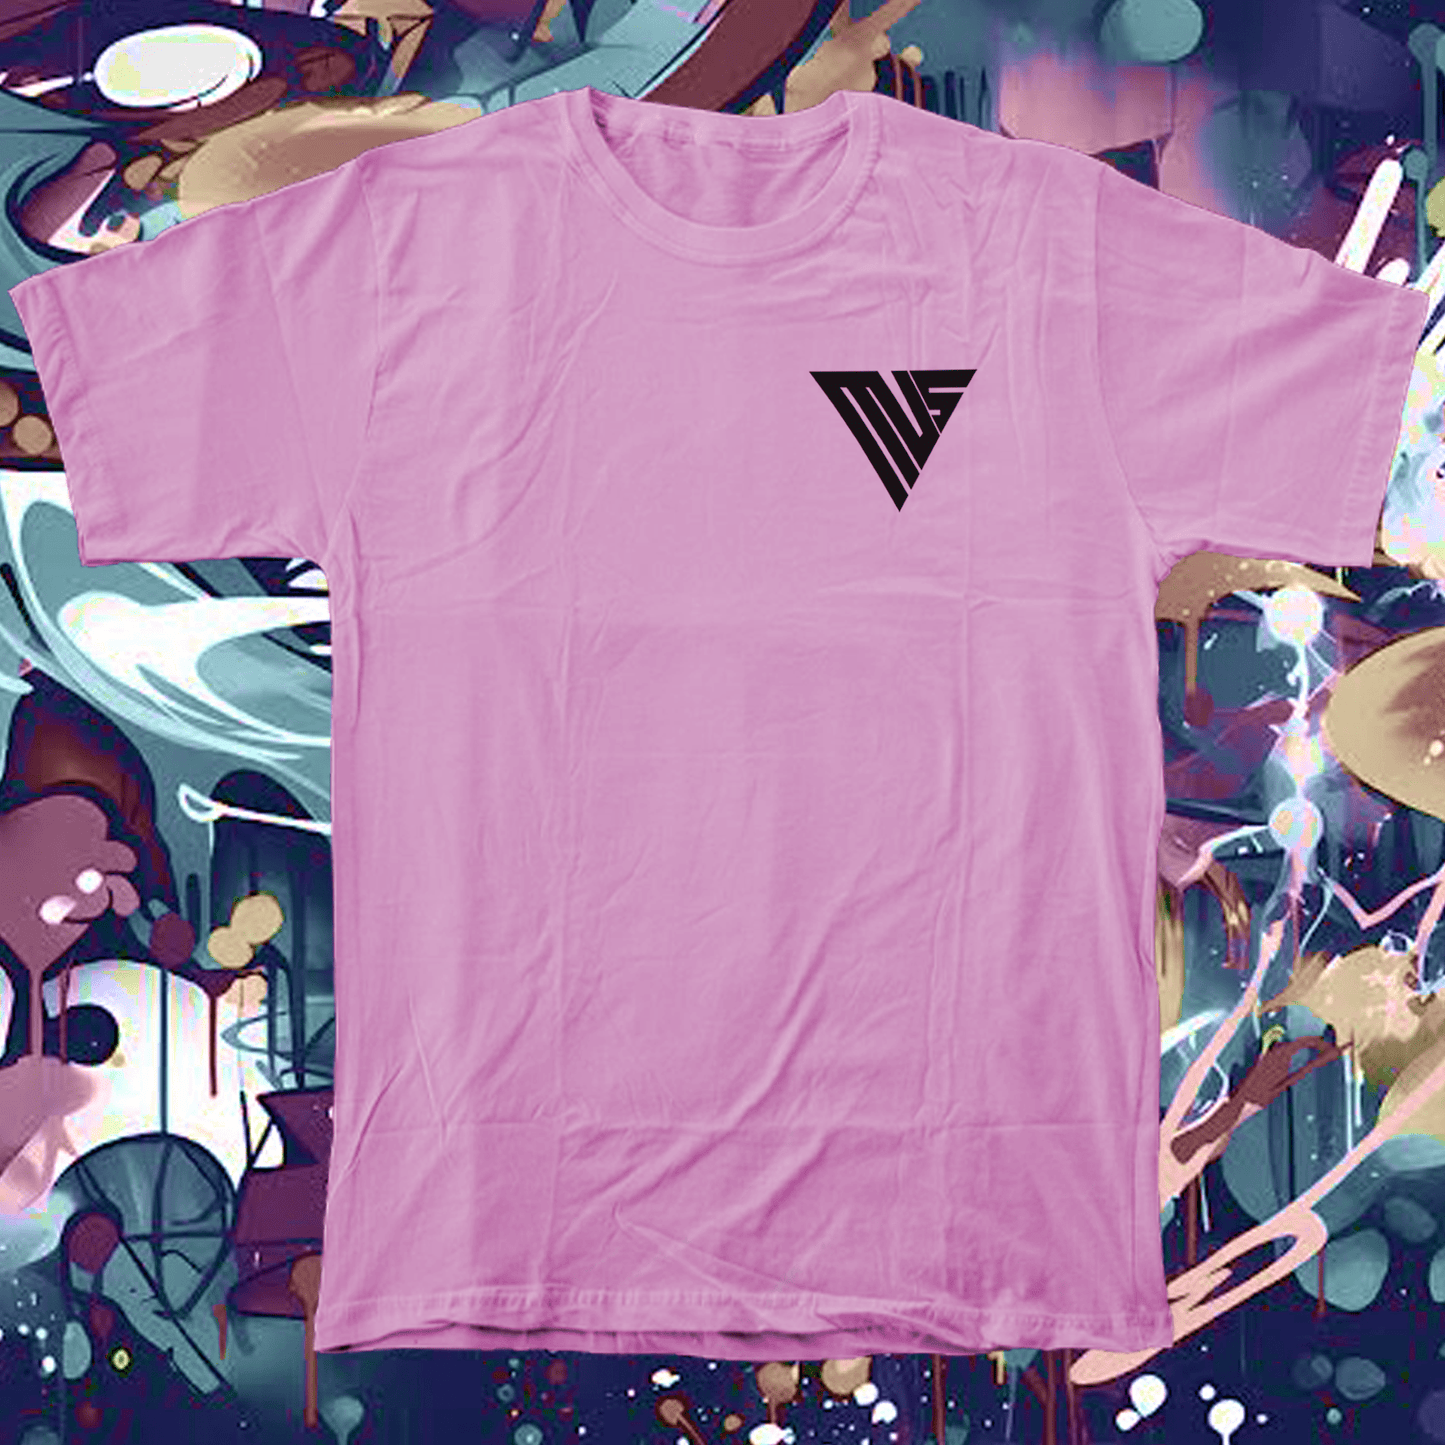 ACE OF DEATH PINK T-SHIRT